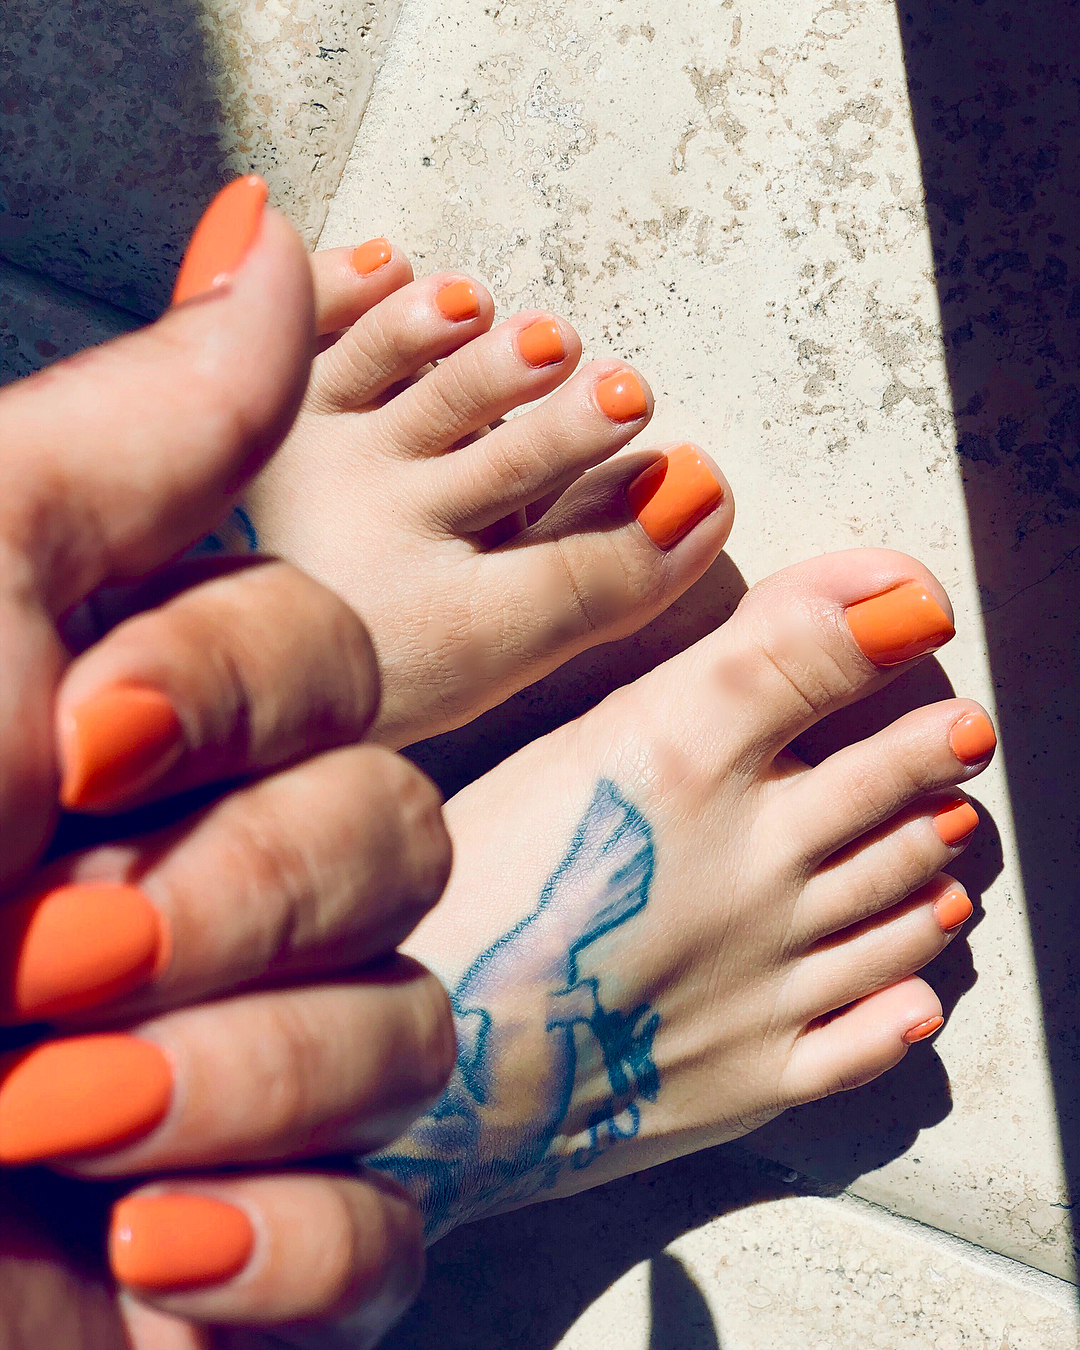 Morgan Westbrooks showing her toes